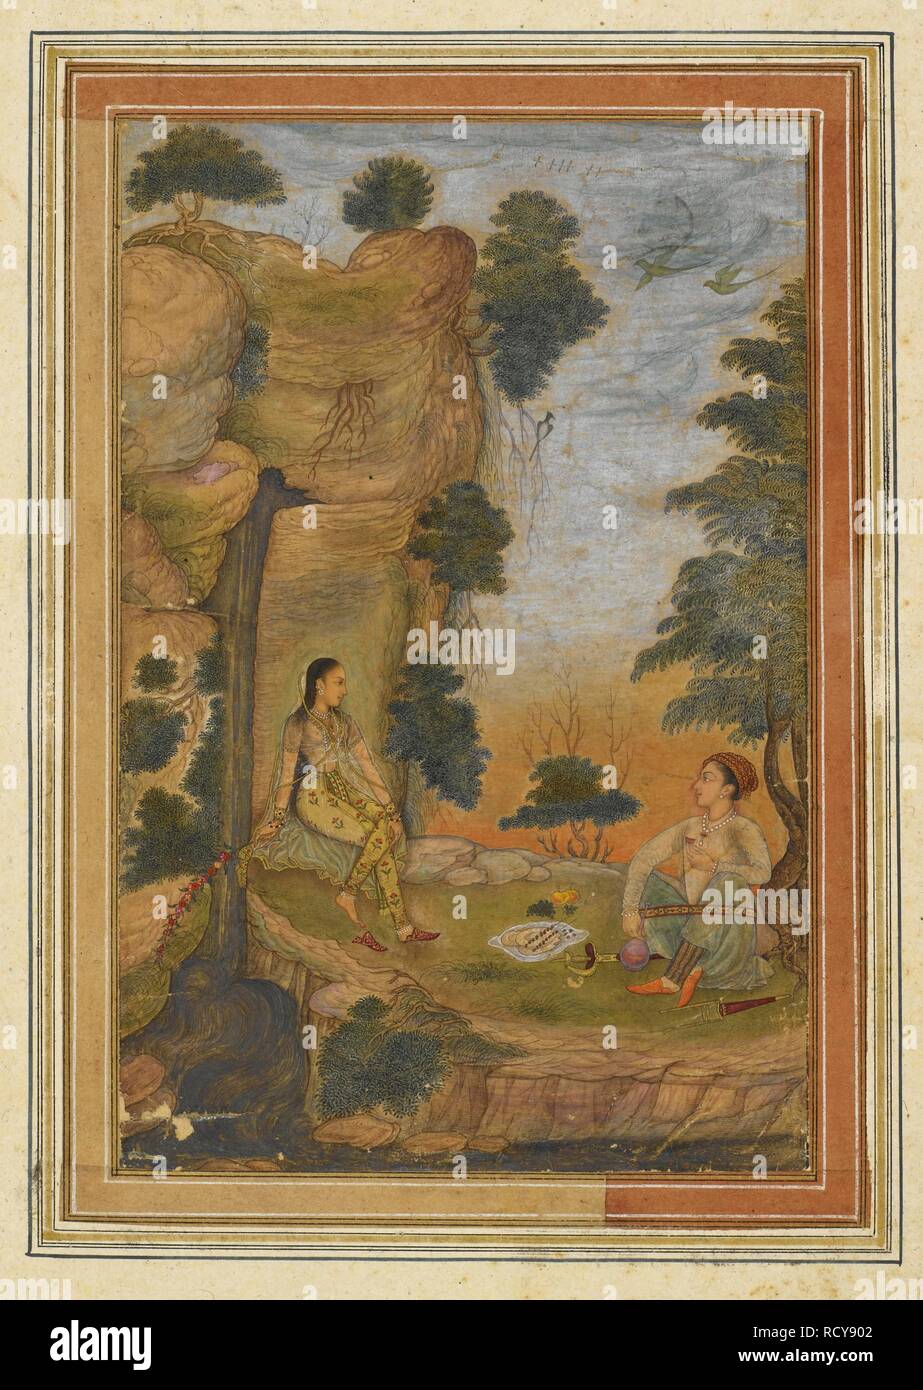 The prince is seated on the right beneath a tree holding a cup and a bottle of wine, his sword and 'katar' on the ground beside him. The princess sits by a waterfall on the left, holding a flower wand. A picnic is spread on the grass between them; a rocky mountainside and trees are above. Total of 10 leaves separately mounted. Johnston collection. c.1660. Opaque watercolour.   . Source: J.10,4. Stock Photo